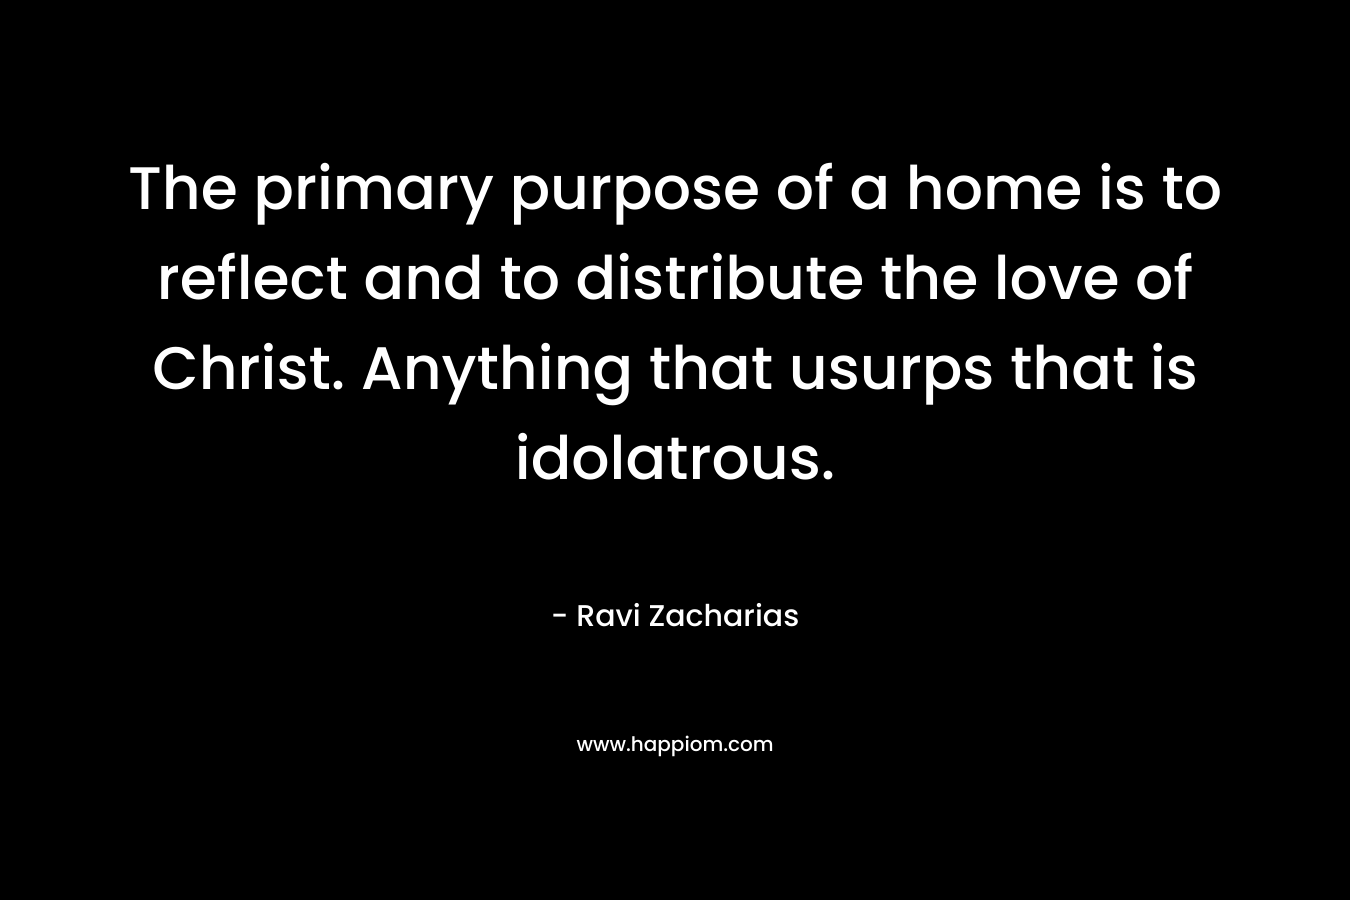 The primary purpose of a home is to reflect and to distribute the love of Christ. Anything that usurps that is idolatrous. – Ravi Zacharias